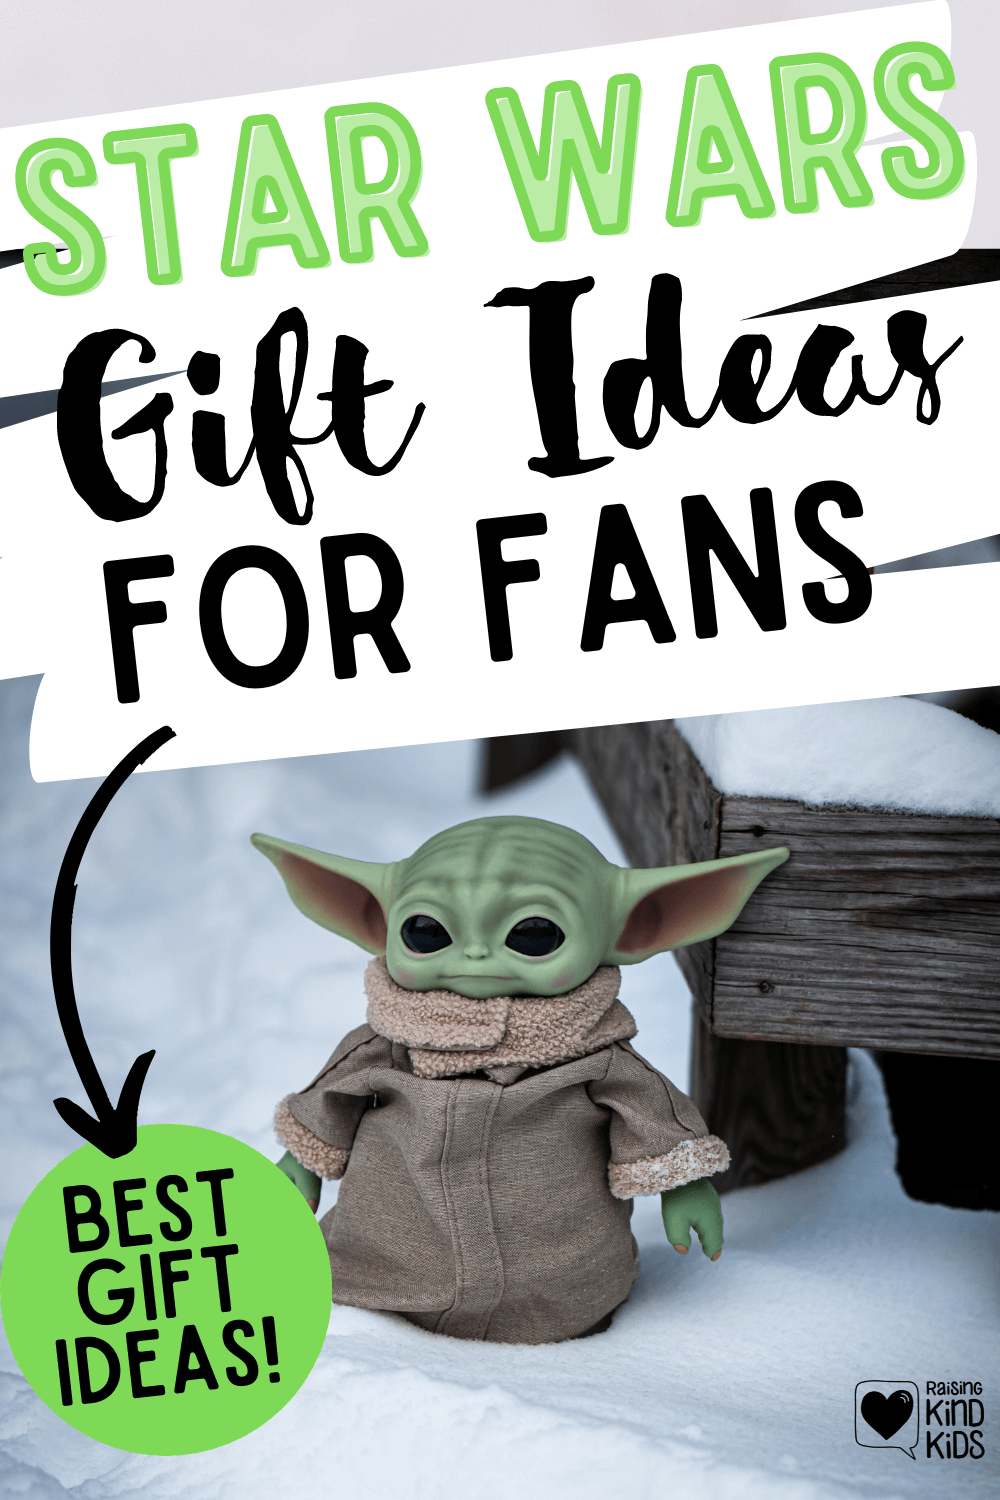 100 of the best Star Wars gifts for the ultimate Star Wars fans and Jedi fighters... including Star Wars books, Star Wars toys and games, Star Wars clothes and Star Wars costumes #Starwars #starwarsgifts #starwarsgiftguide #christmasgifts #Christmasgiftguides #darthvadergifts #jedigifts #giftguides